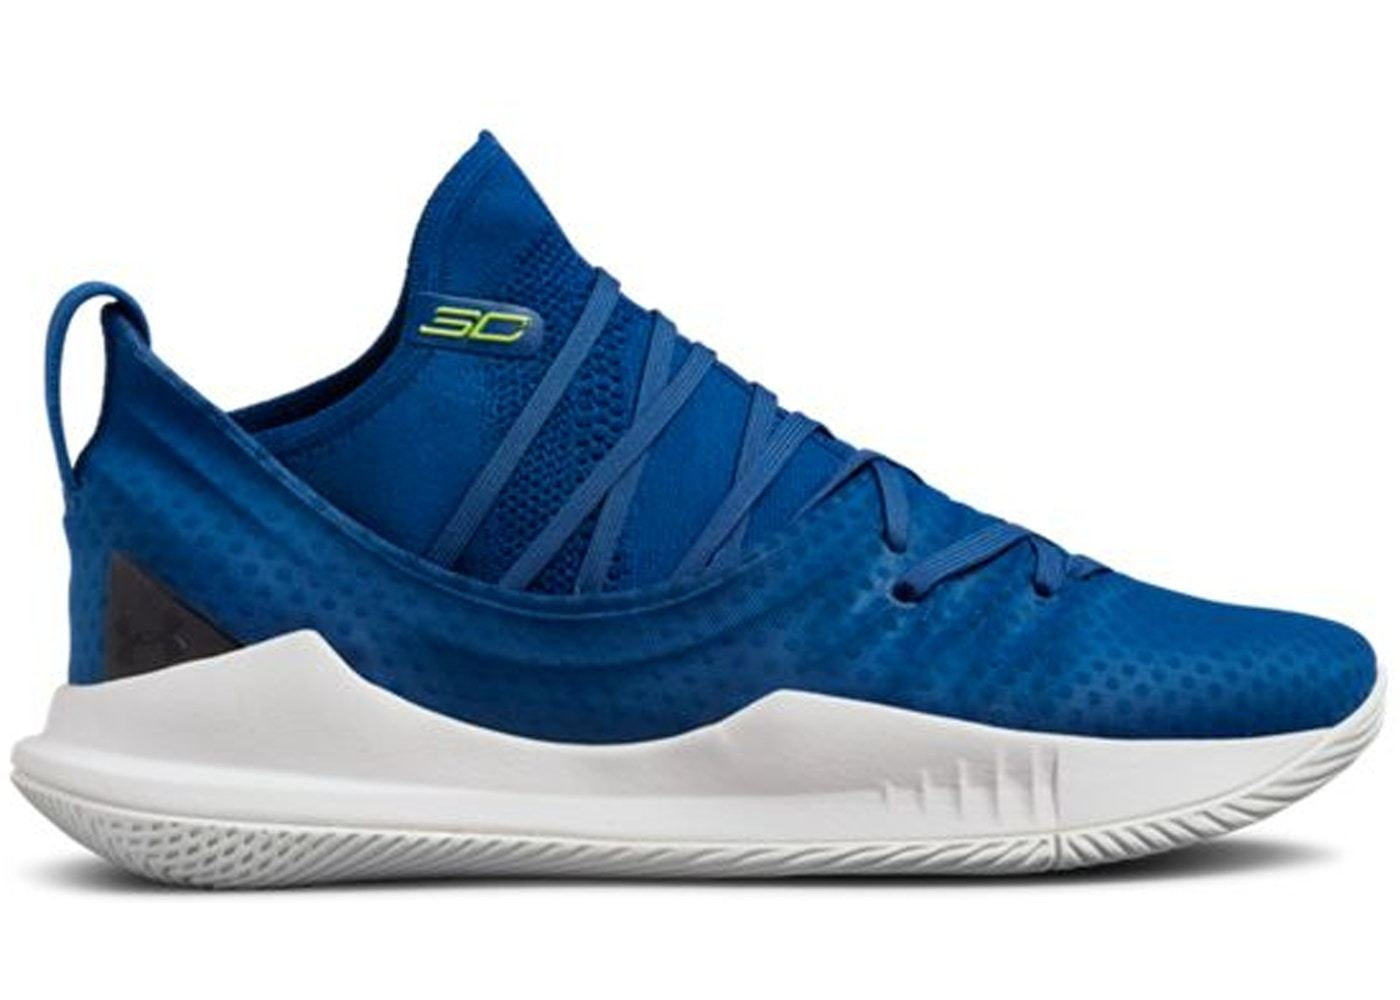 curry 5 blue and yellow